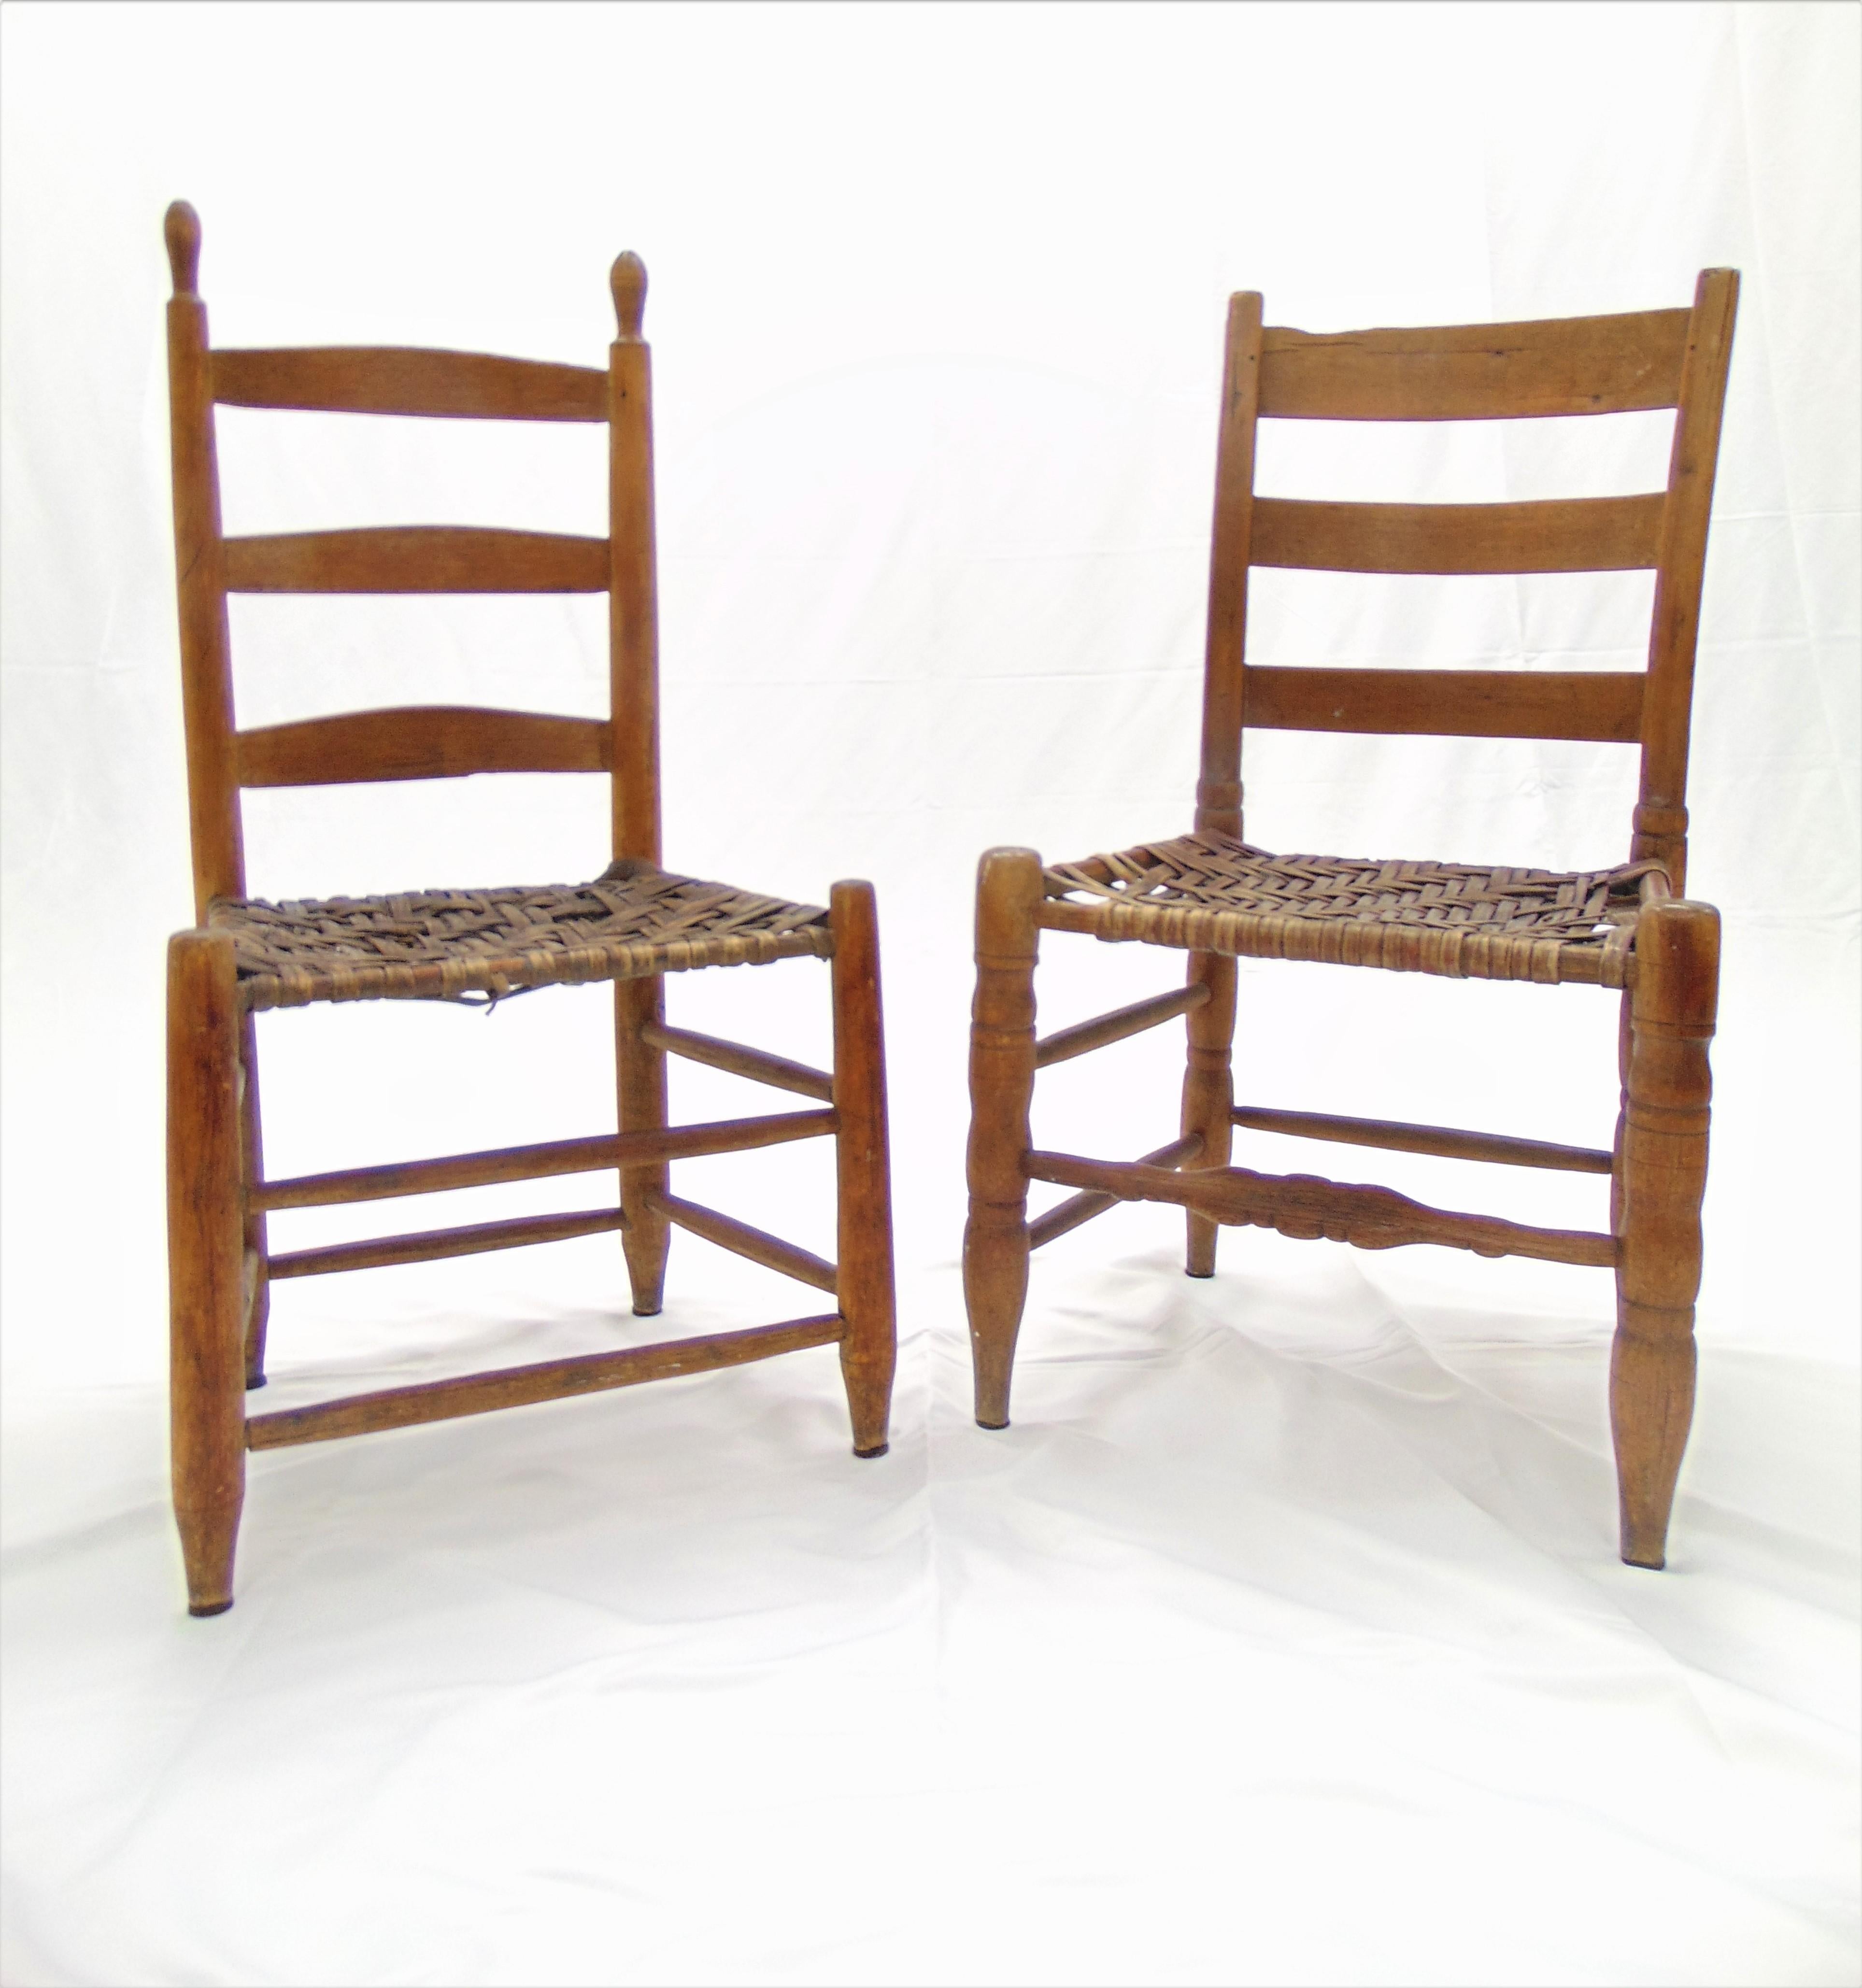 Pair of Antique Primitive Ladder Back and Splint Seats Early 19th Century For Sale 3